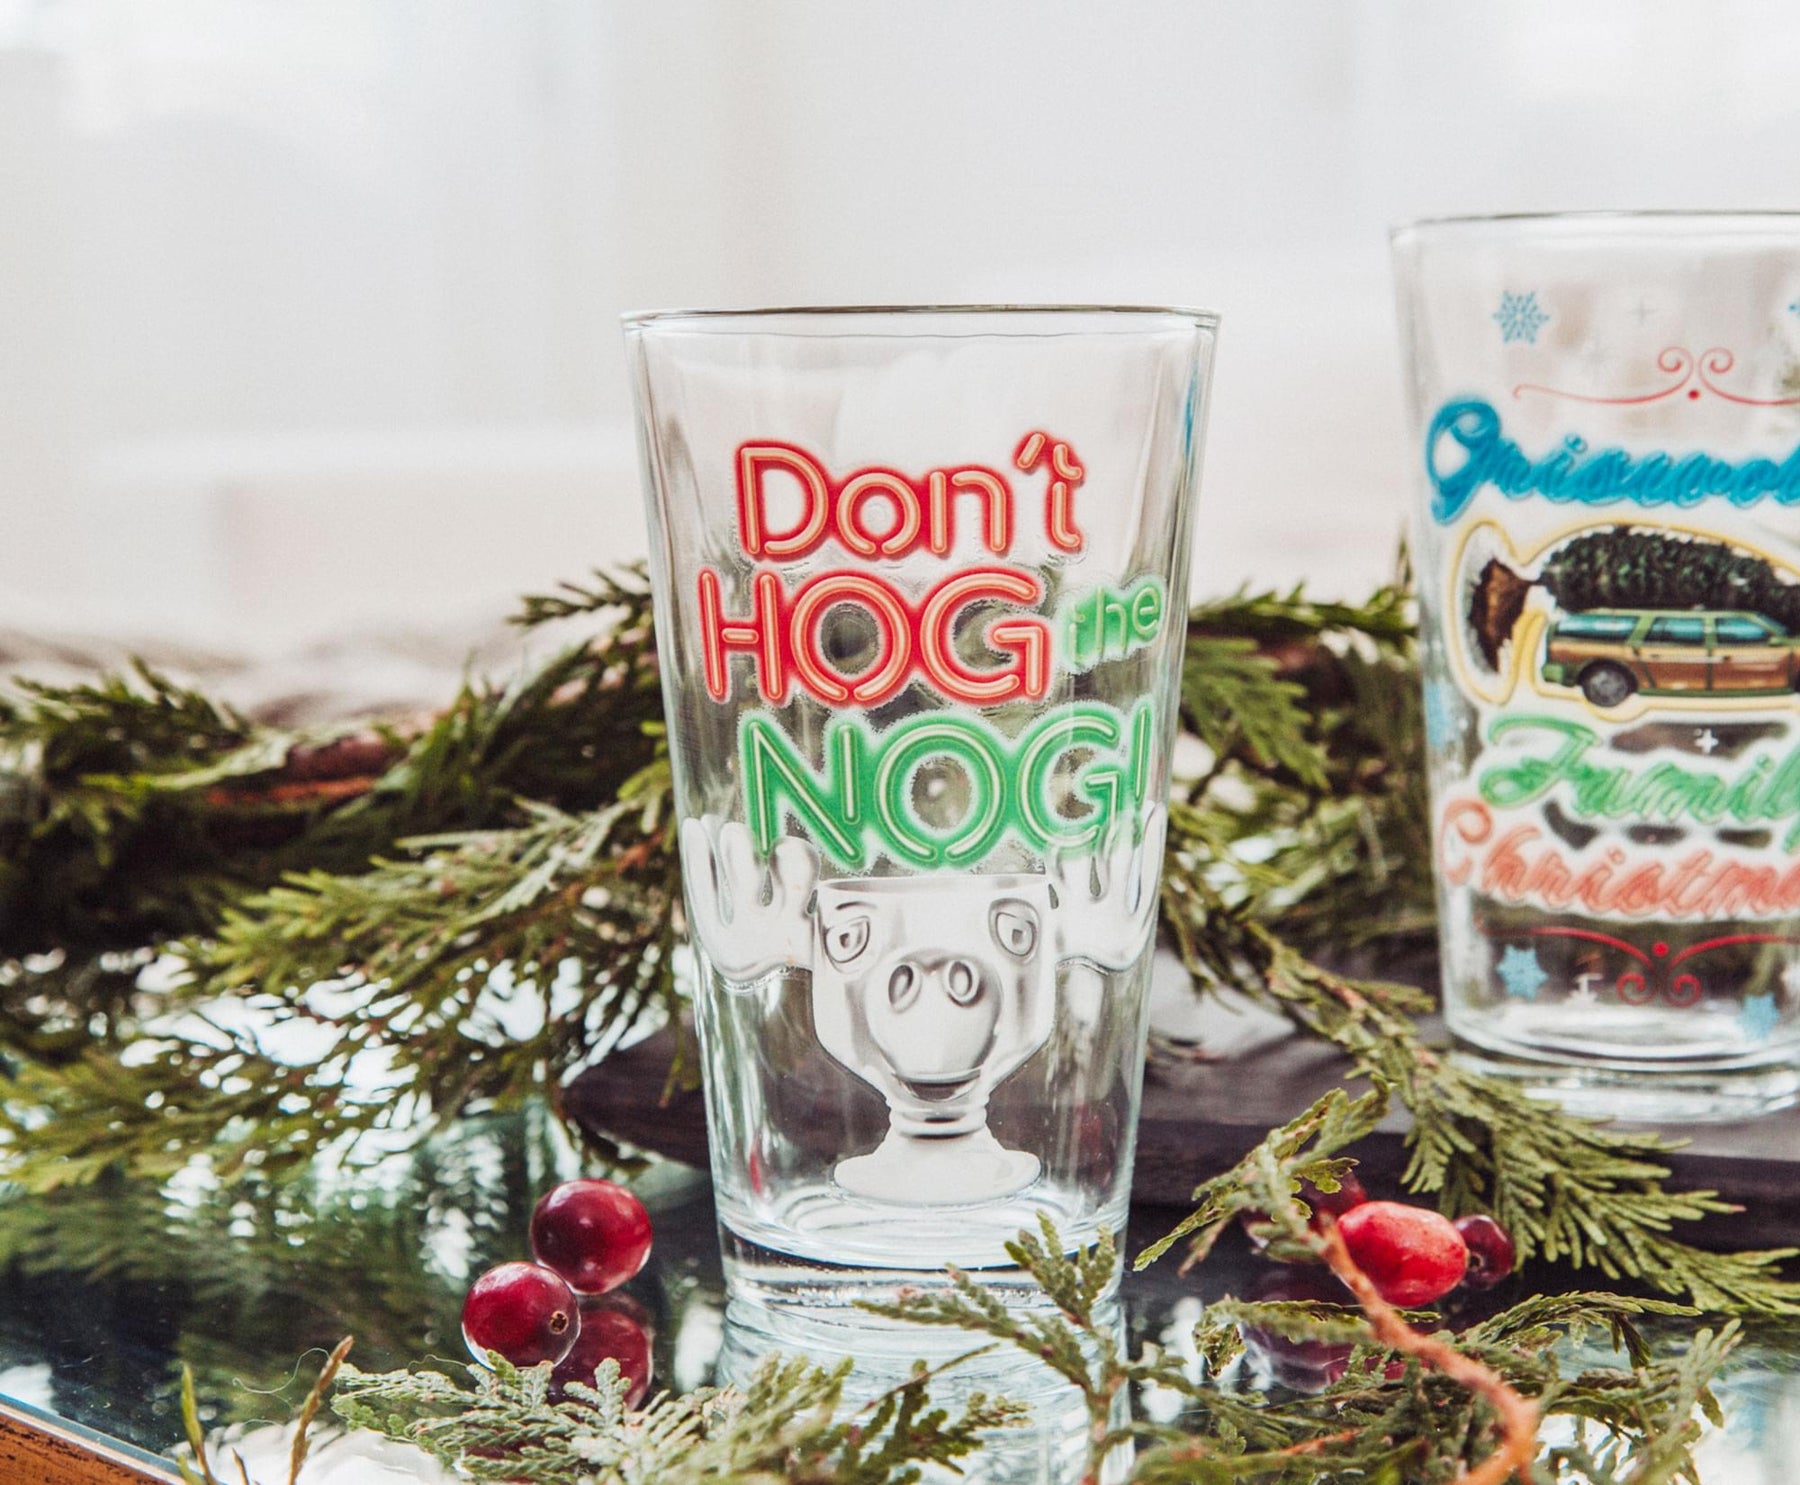 National Lampoon's Christmas Vacation Quotes 16-Ounce Pint Glasses | Set of 4